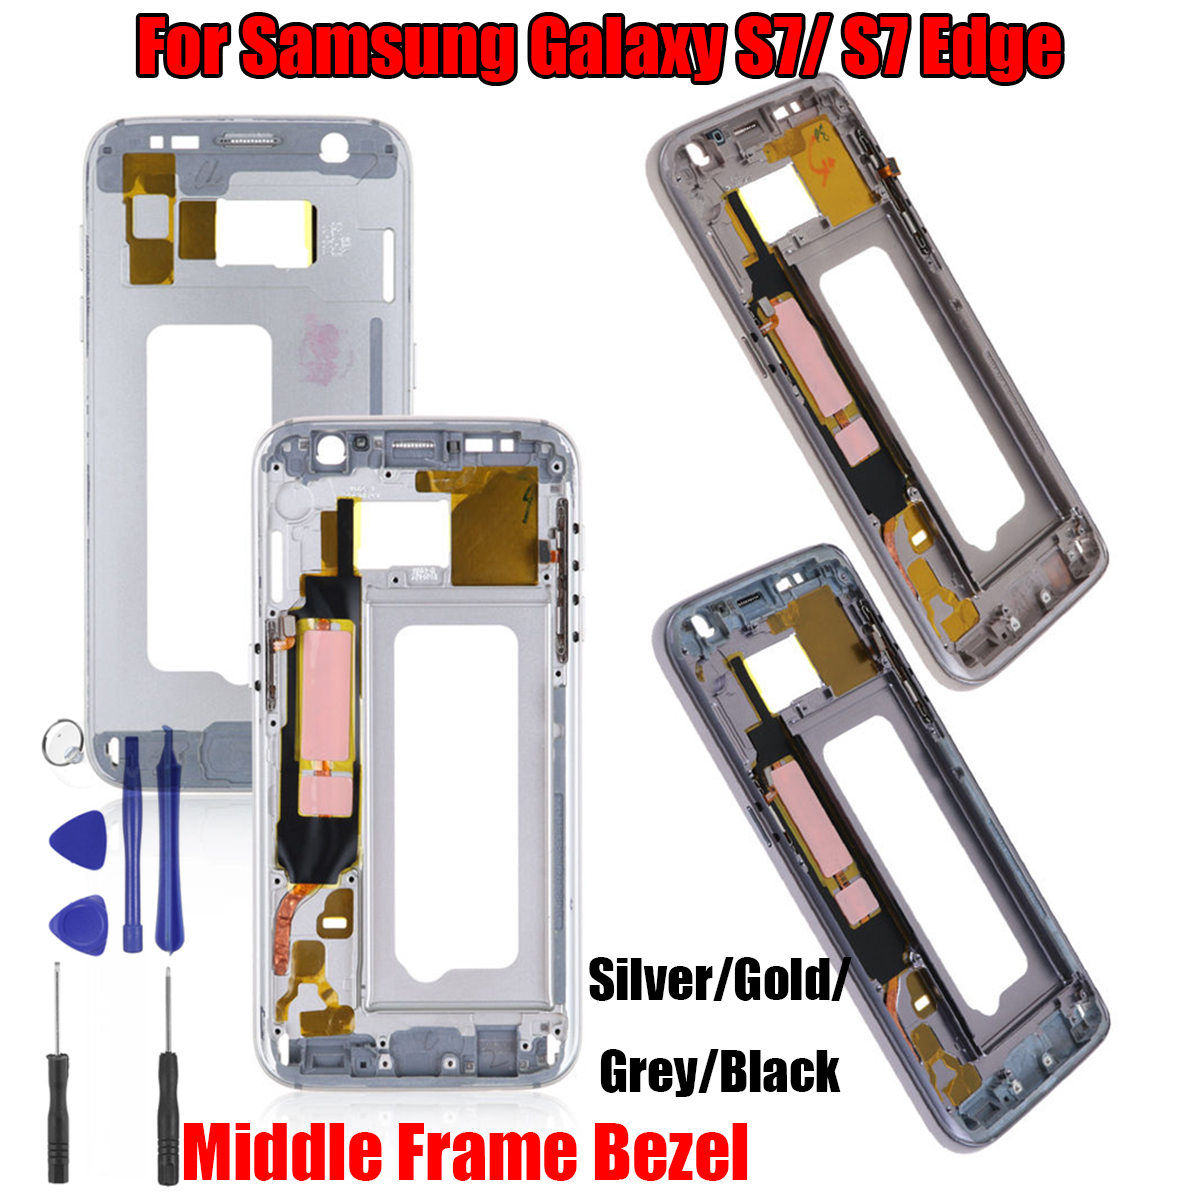 Chassis-Mid-Frame-Cover-Replacement-Assembly-for-Samsung-Galaxy-S7S7-Edge-1280295